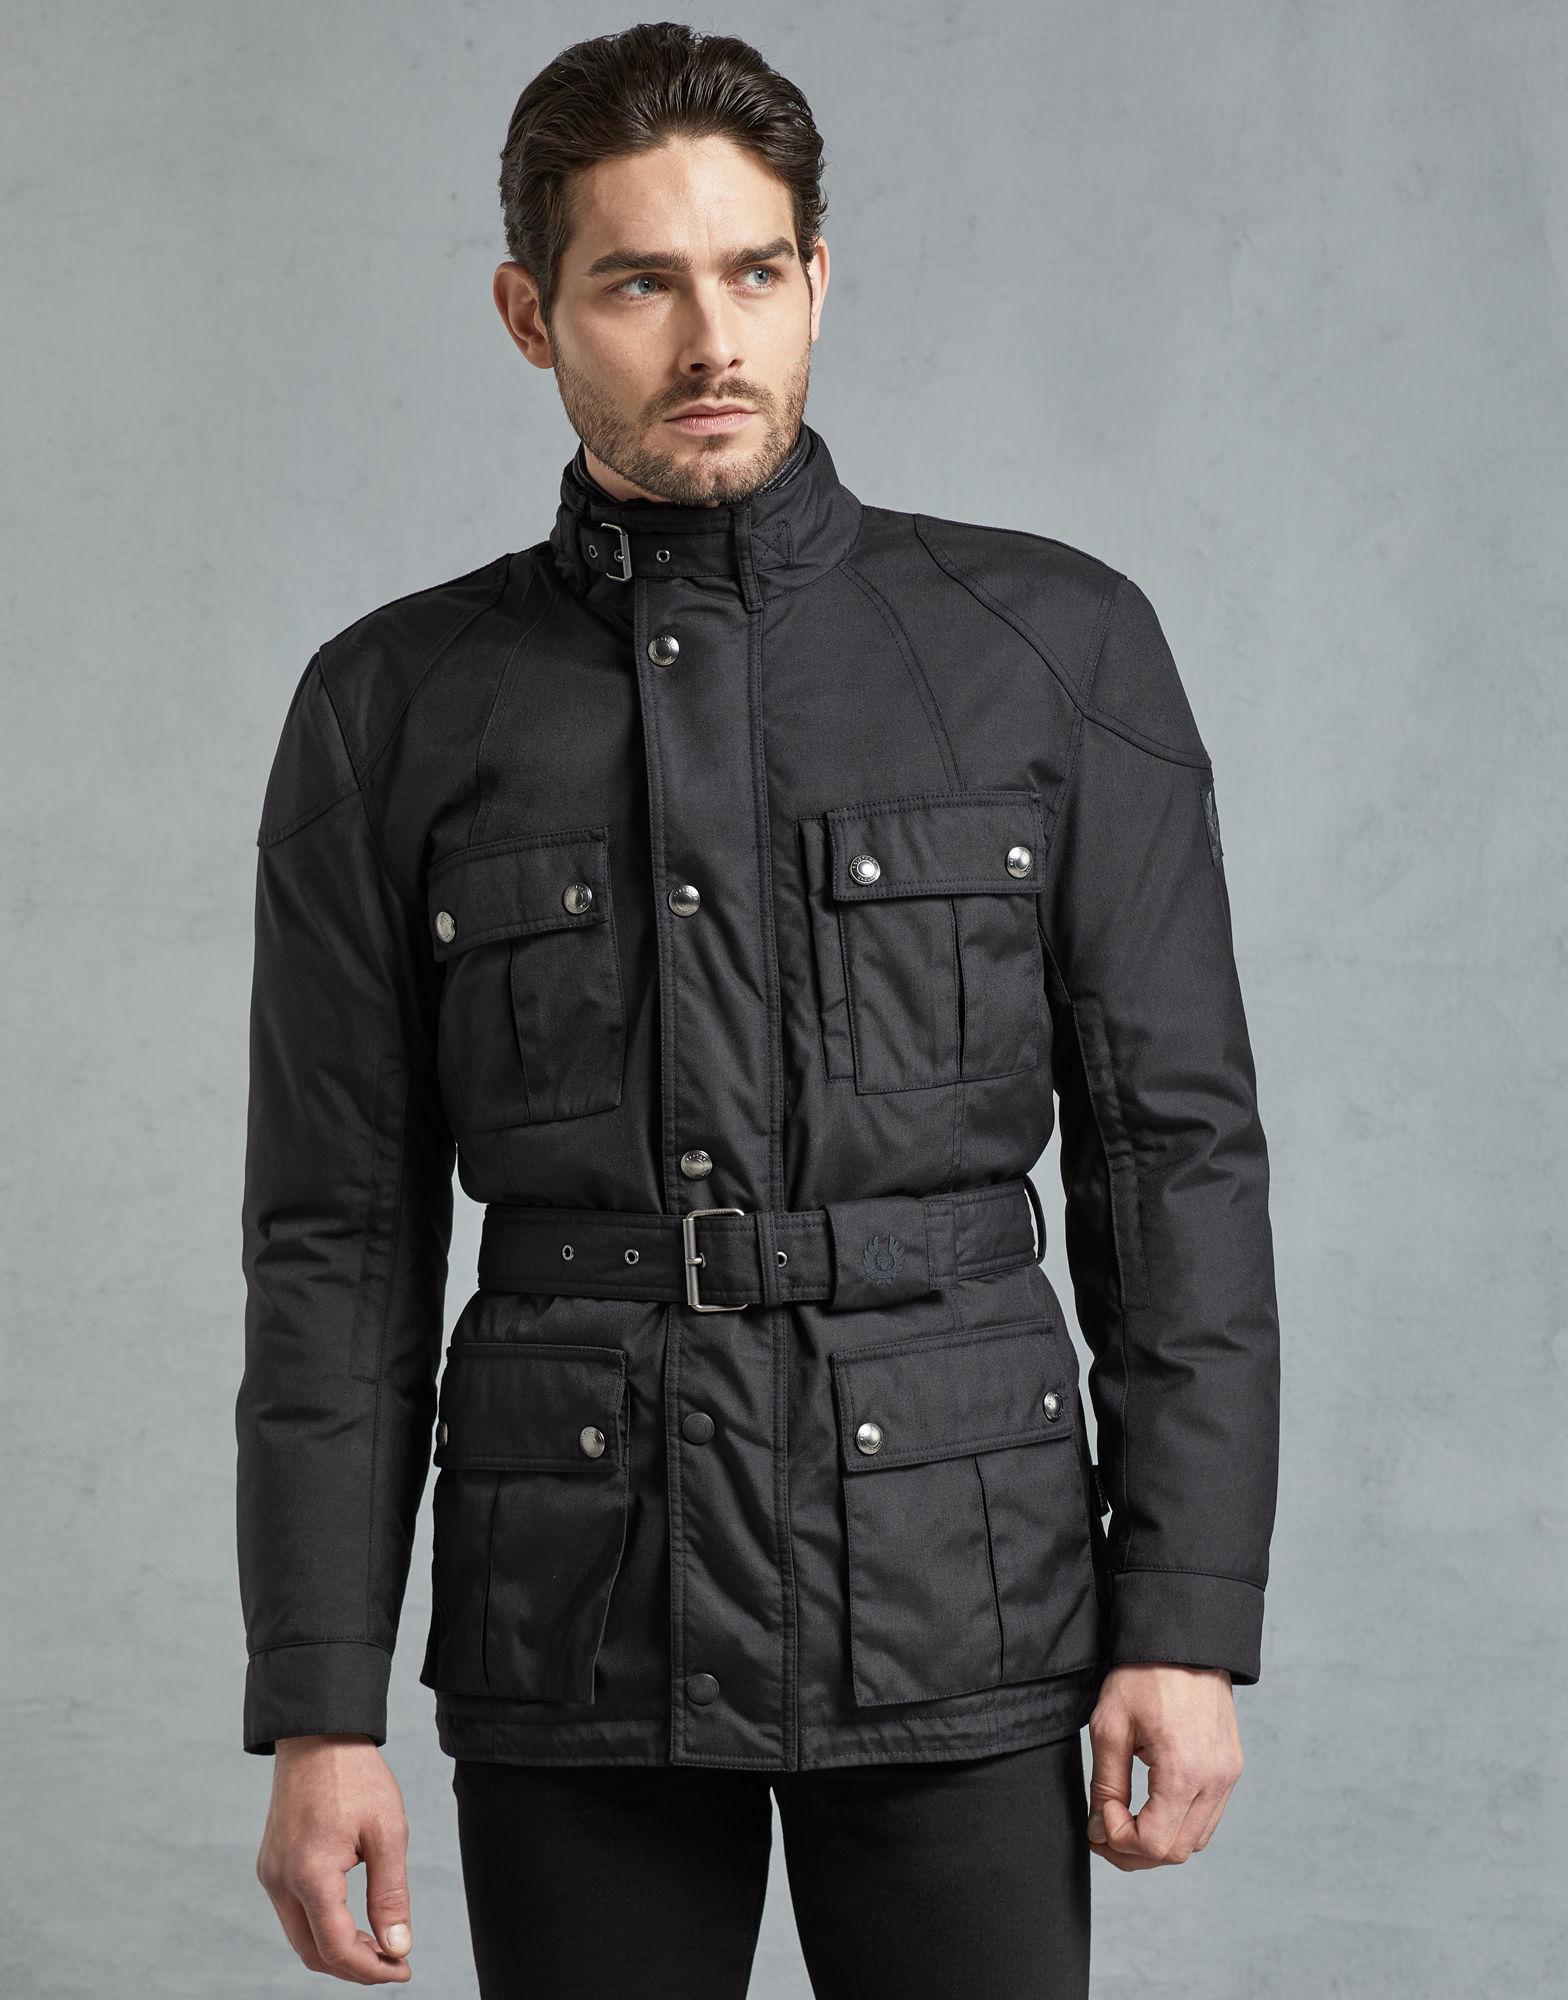 Belstaff Synthetic Snaefell Motorcycle Jacket in Black for Men - Lyst